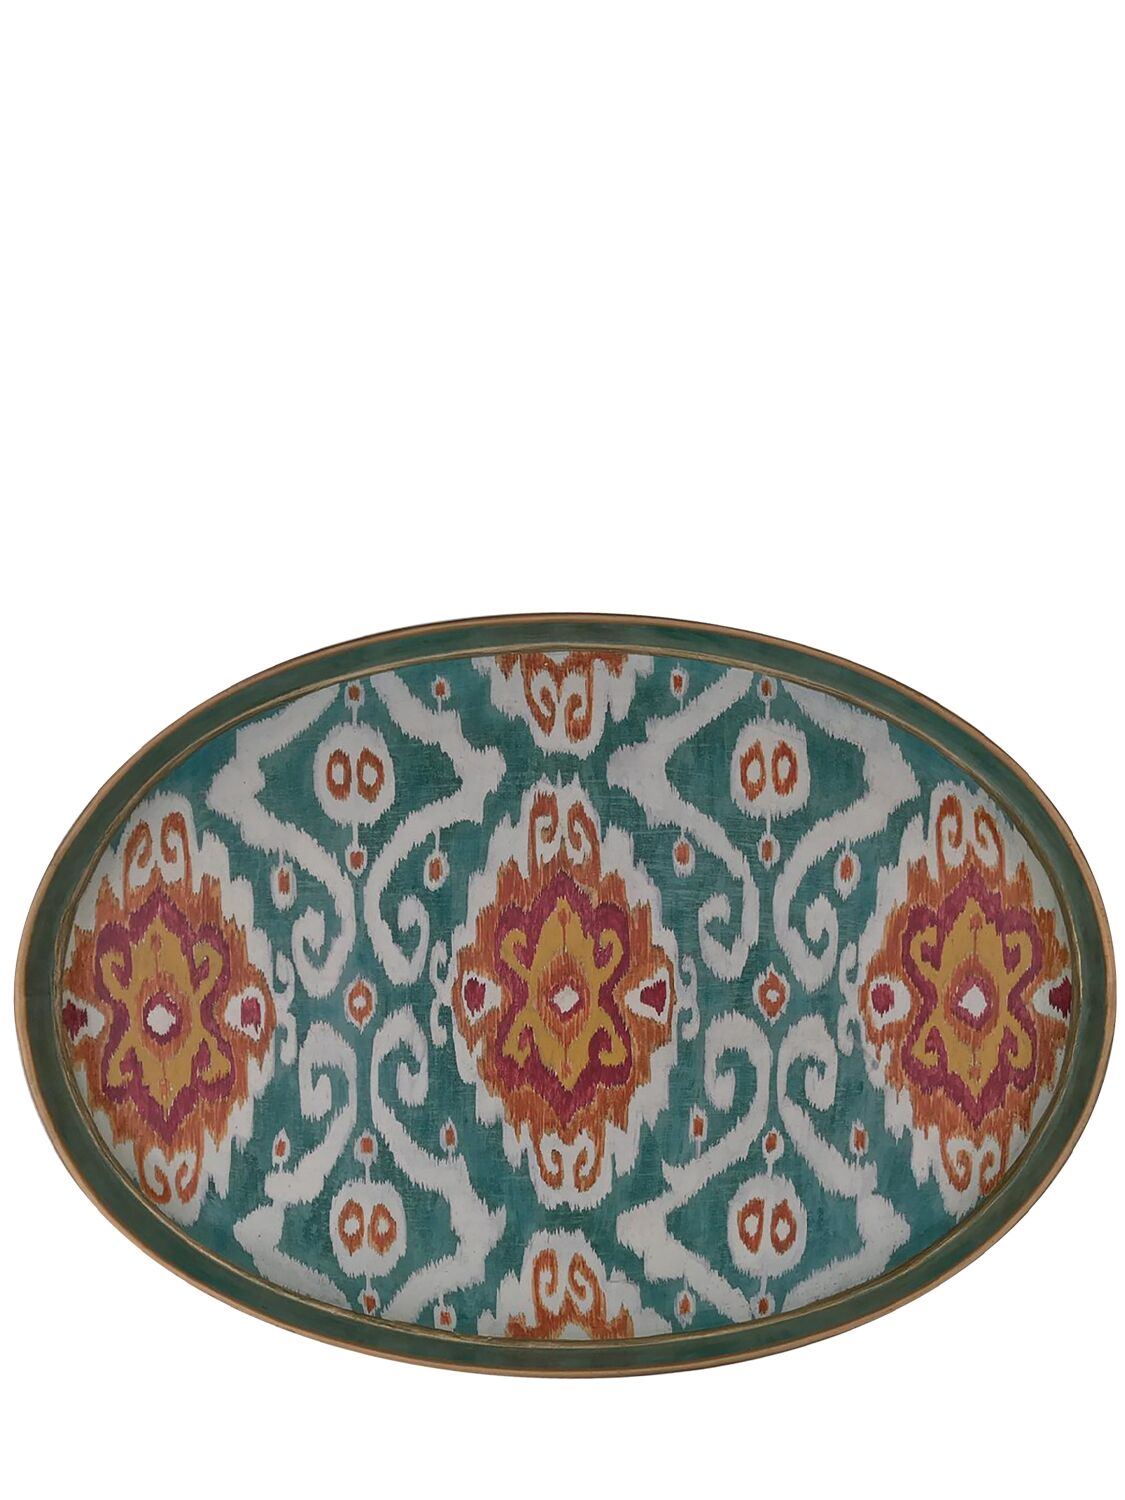 Les Ottomans Ikat Hand-painted Iron Tray In Multi